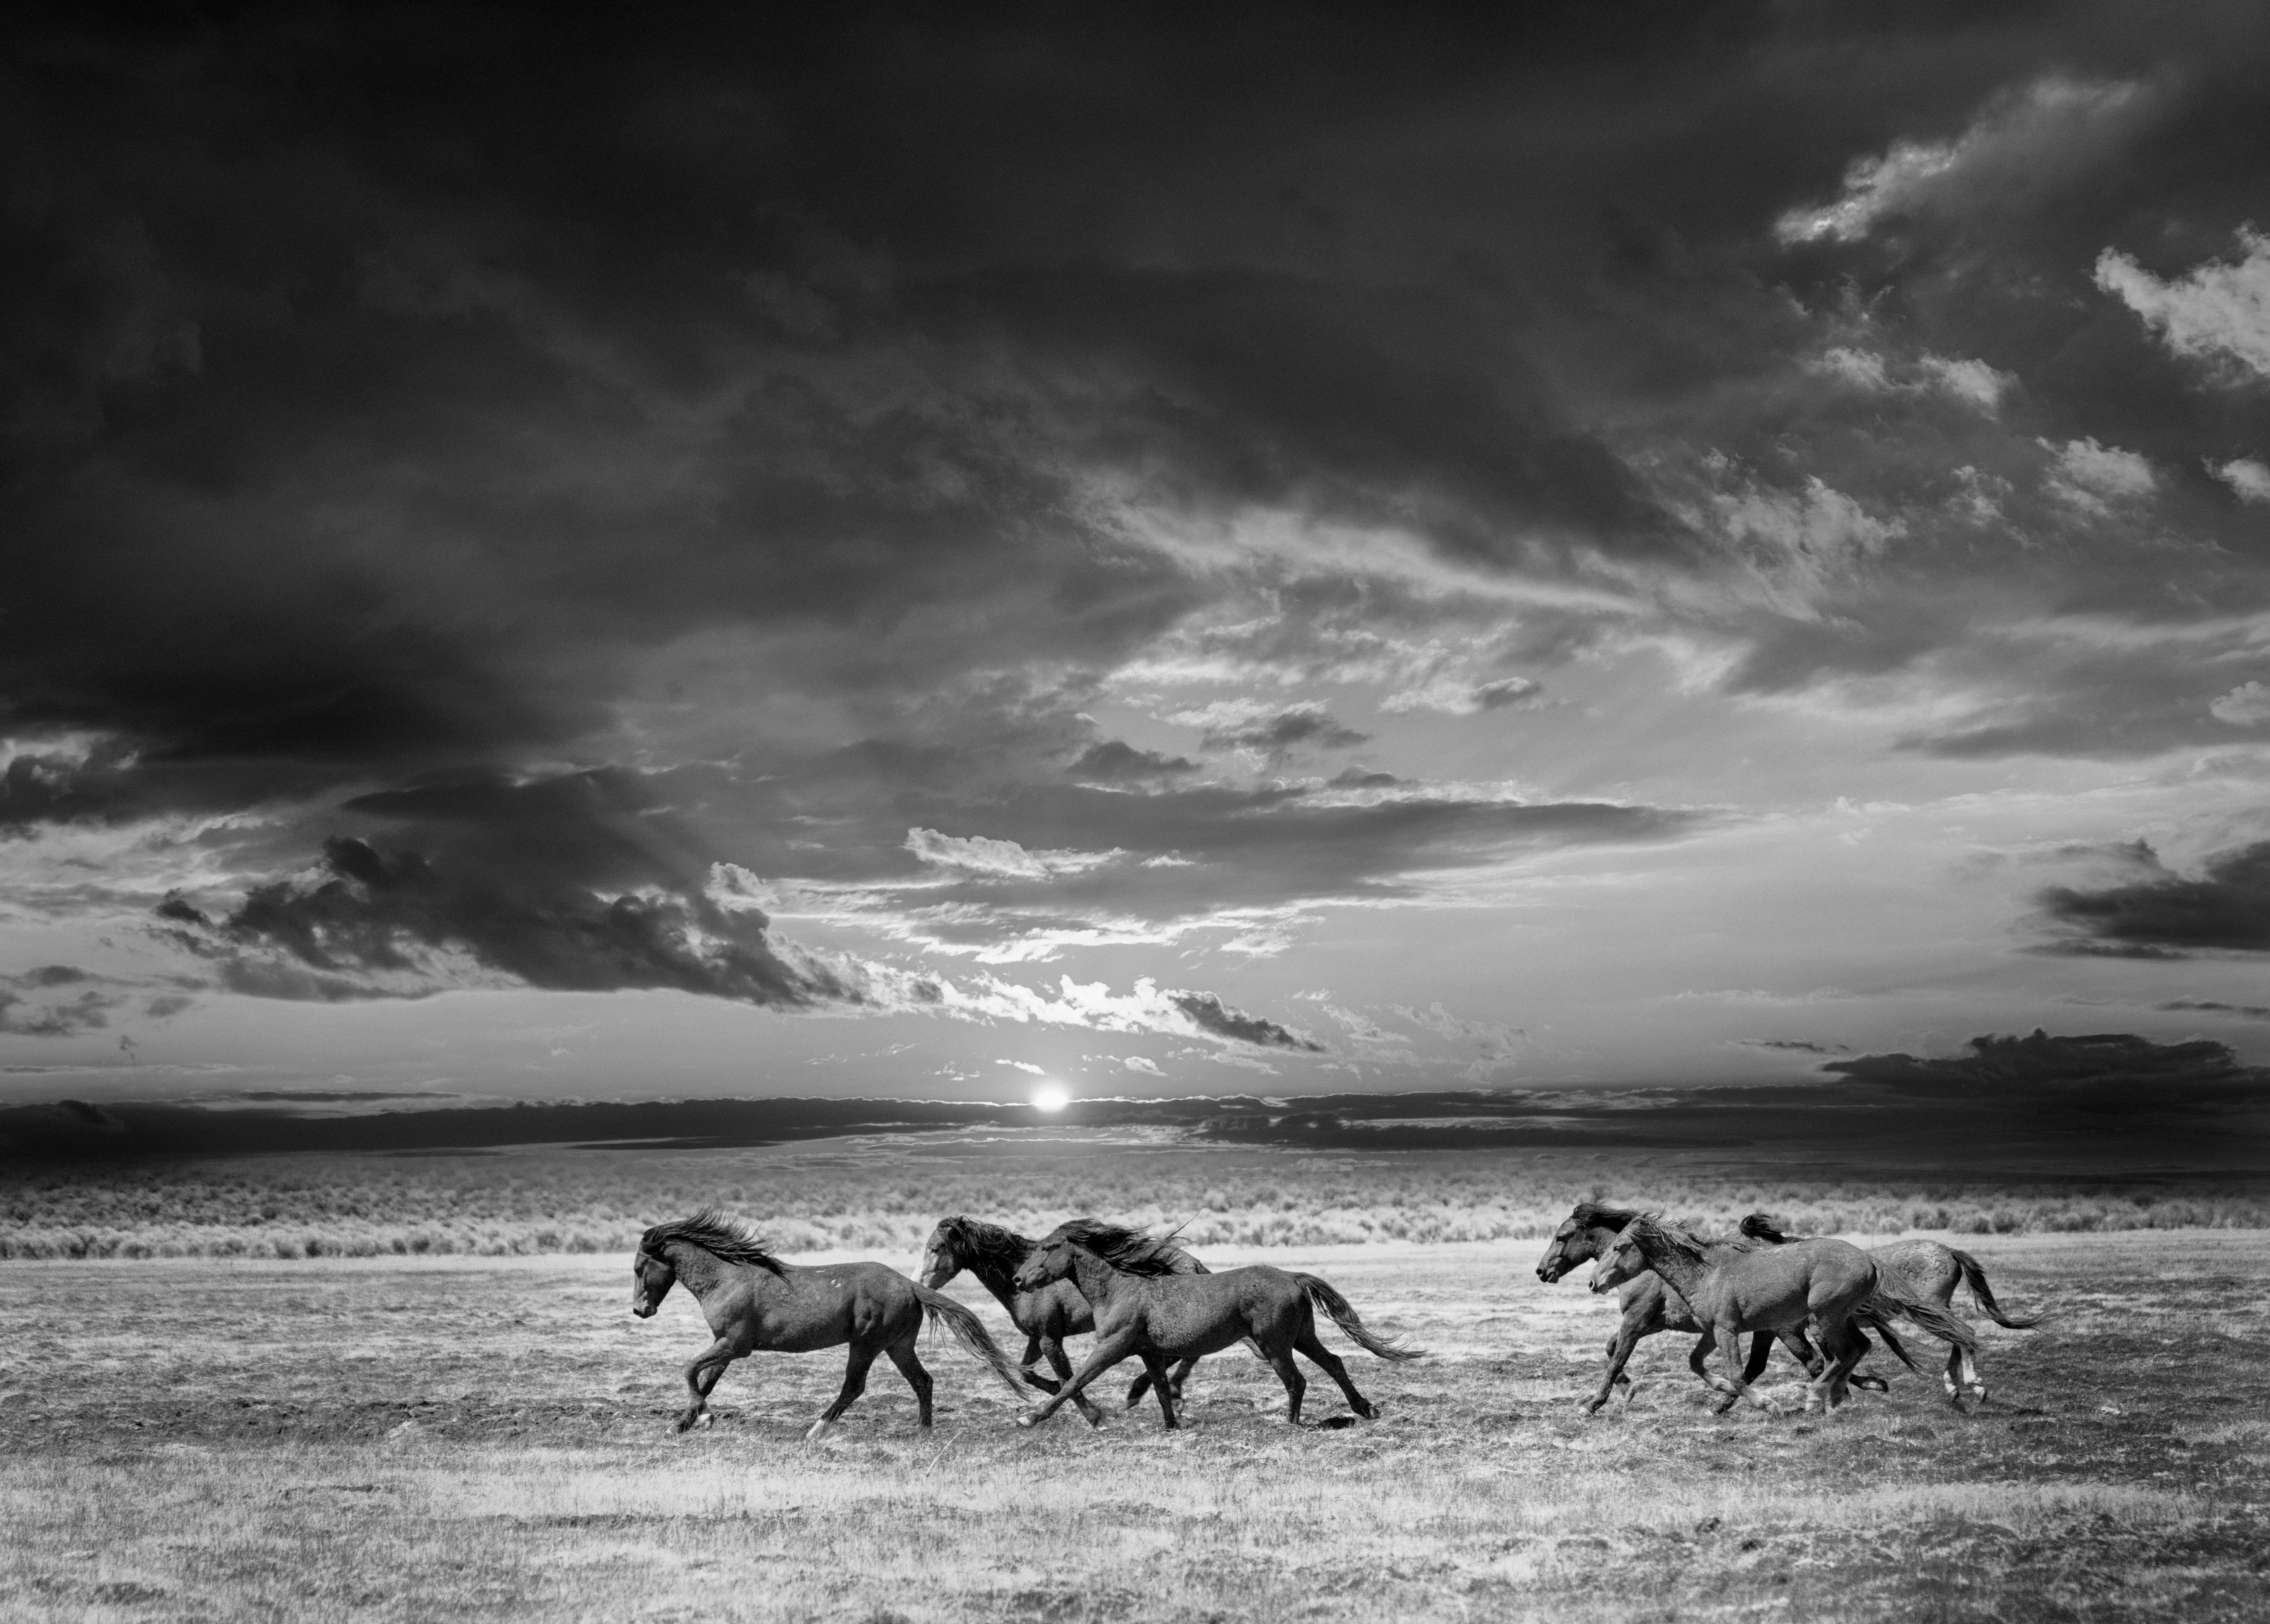 Shane Russeck Animal Print -  "Chasing the Light" 40x50 Photography Wild Horses Mustangs Photograph Fine Art